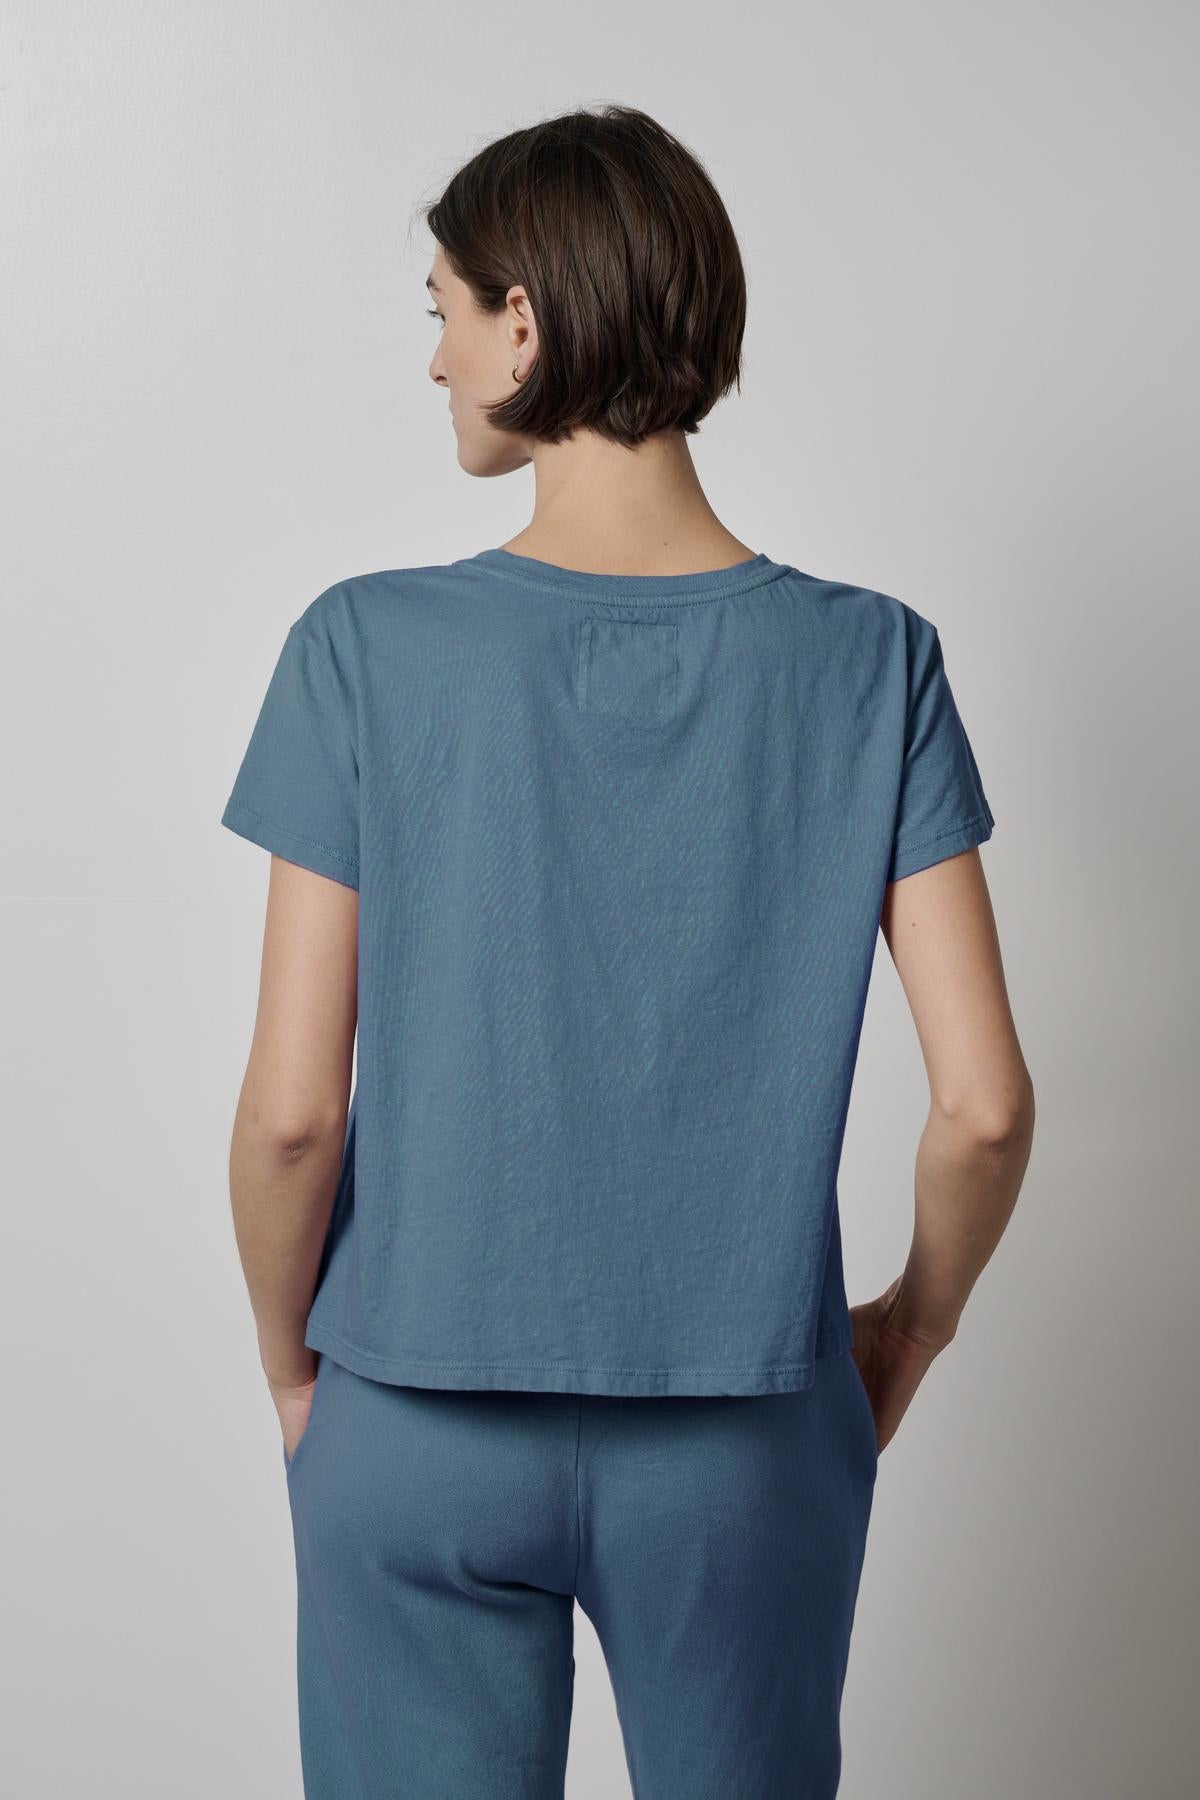 The back view of a woman wearing a blue Velvet by Jenny Graham TOPANGA TEE and pants.-35721216884929